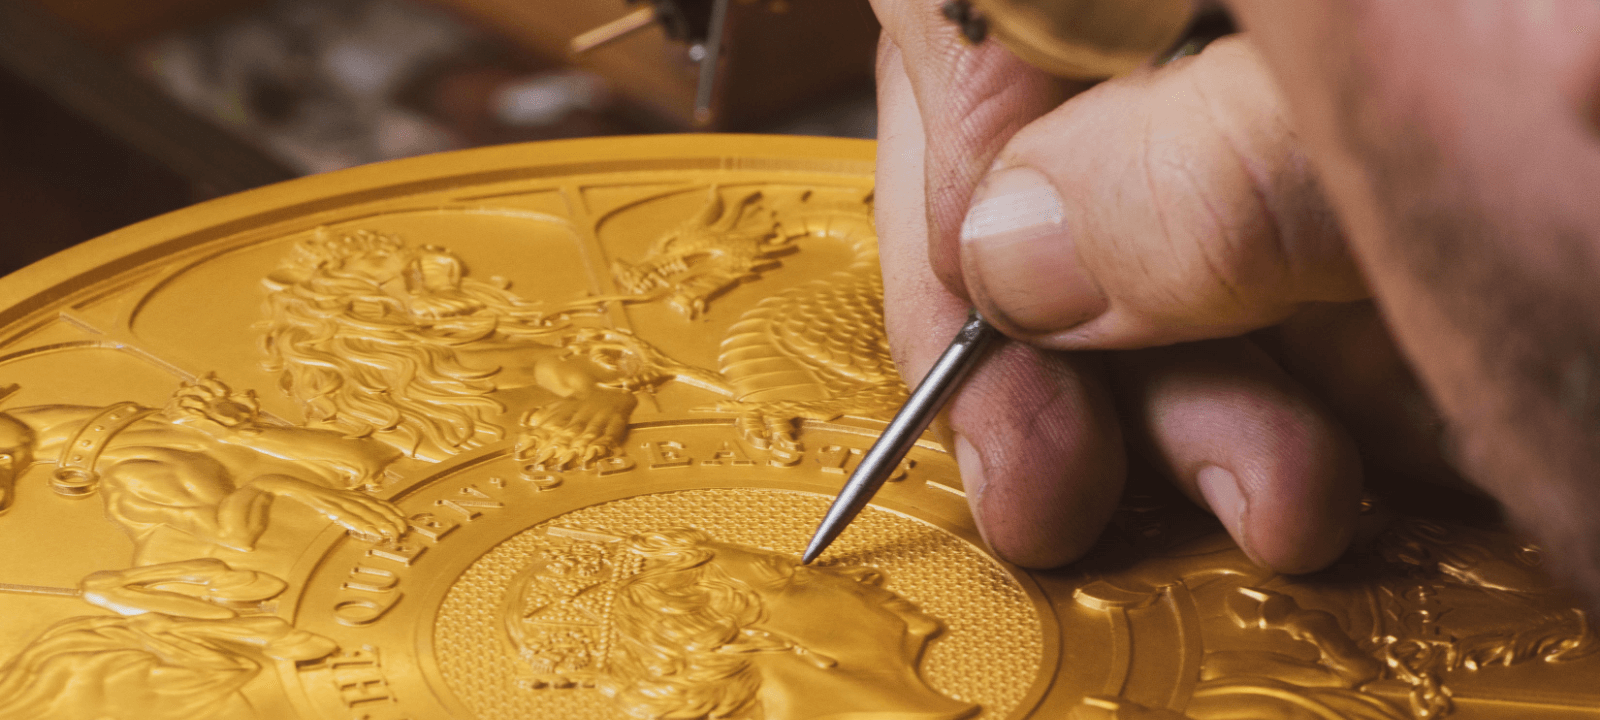 Short history of art on coins